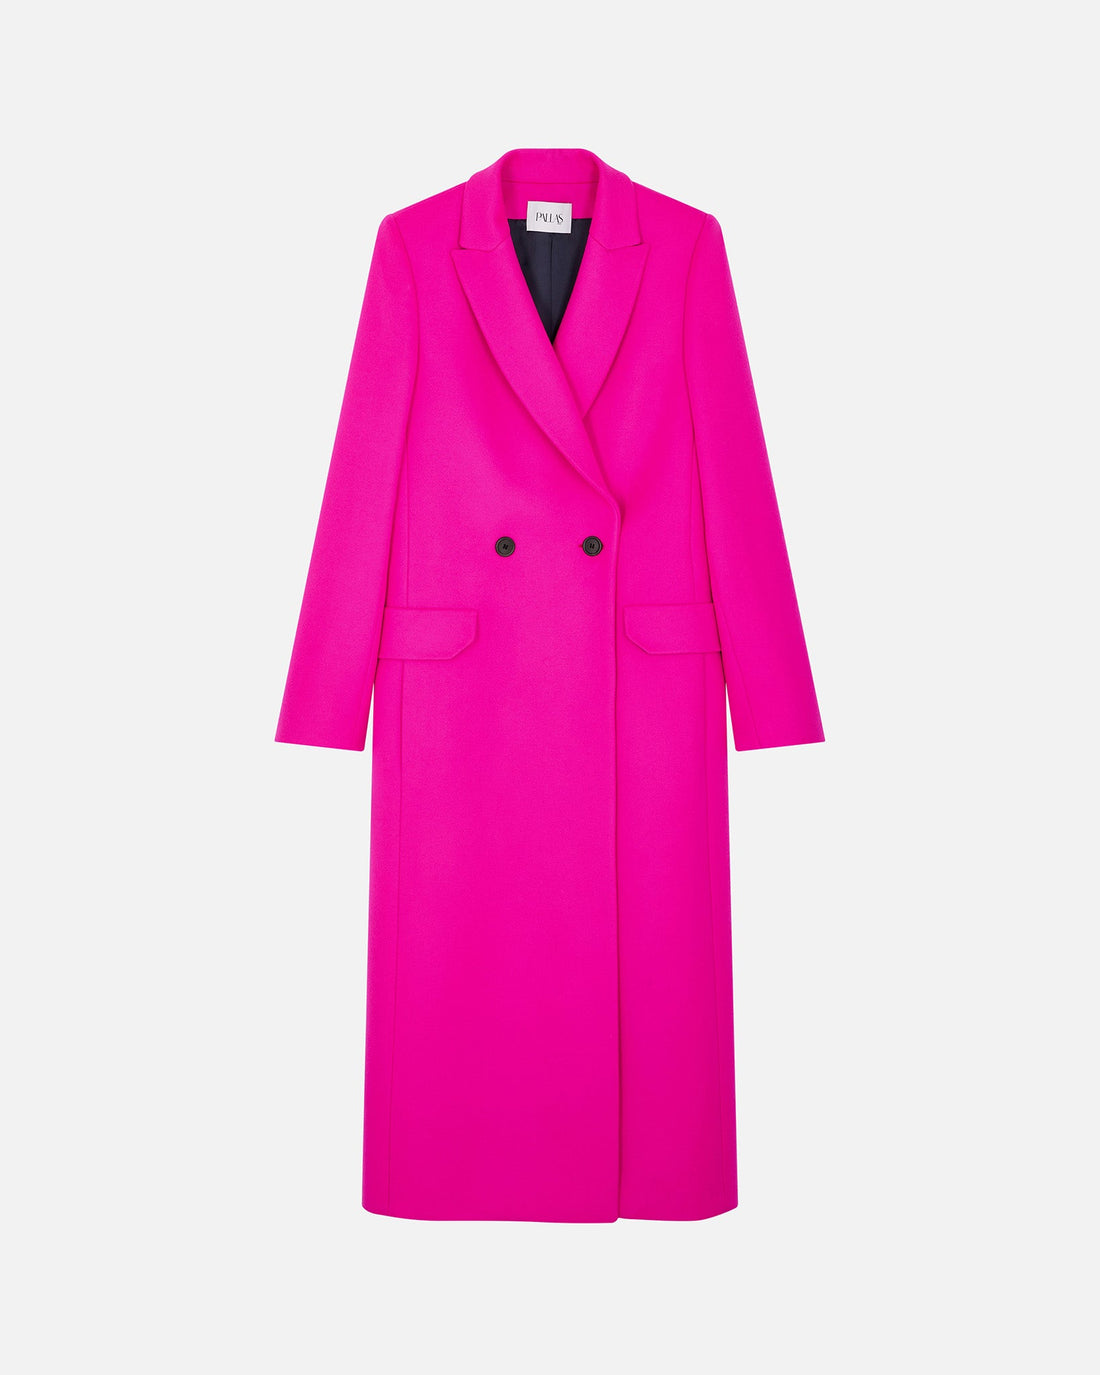 Our classic double-breasted tuxedo coat in a vibrant and luxurious fuchsia cashmere and wool blend. PALLAS PARIS